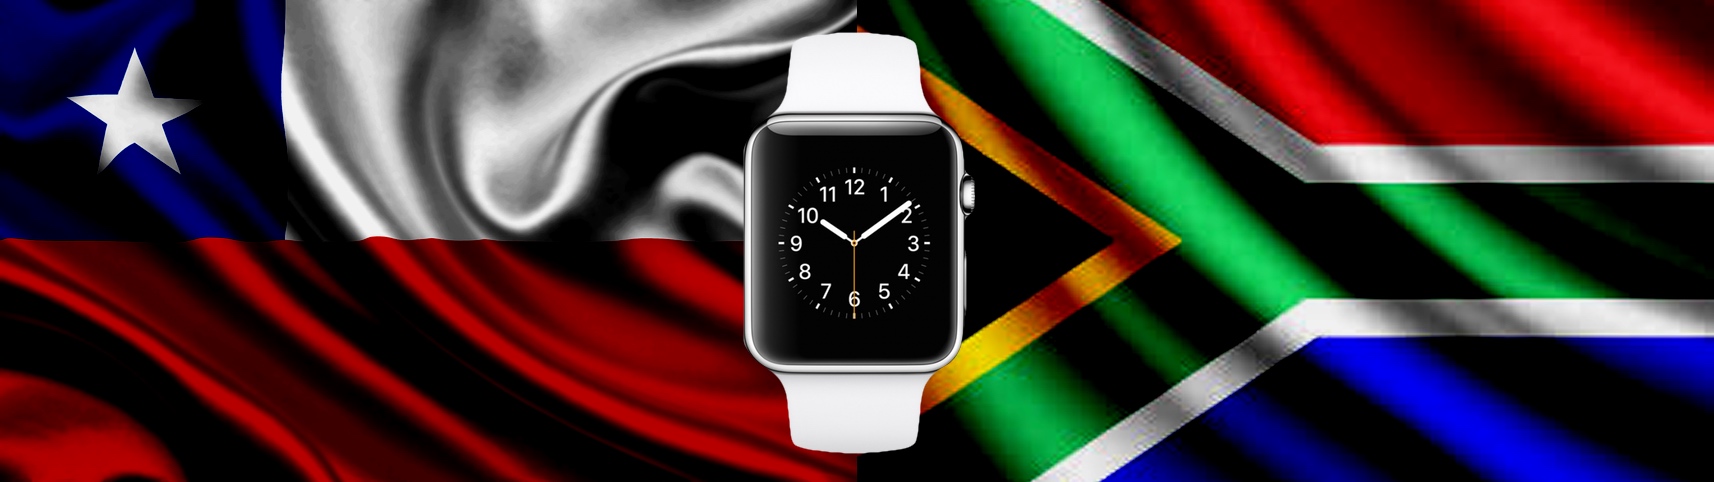 Apple Watch Arrives In Chile And South Africa On October 23